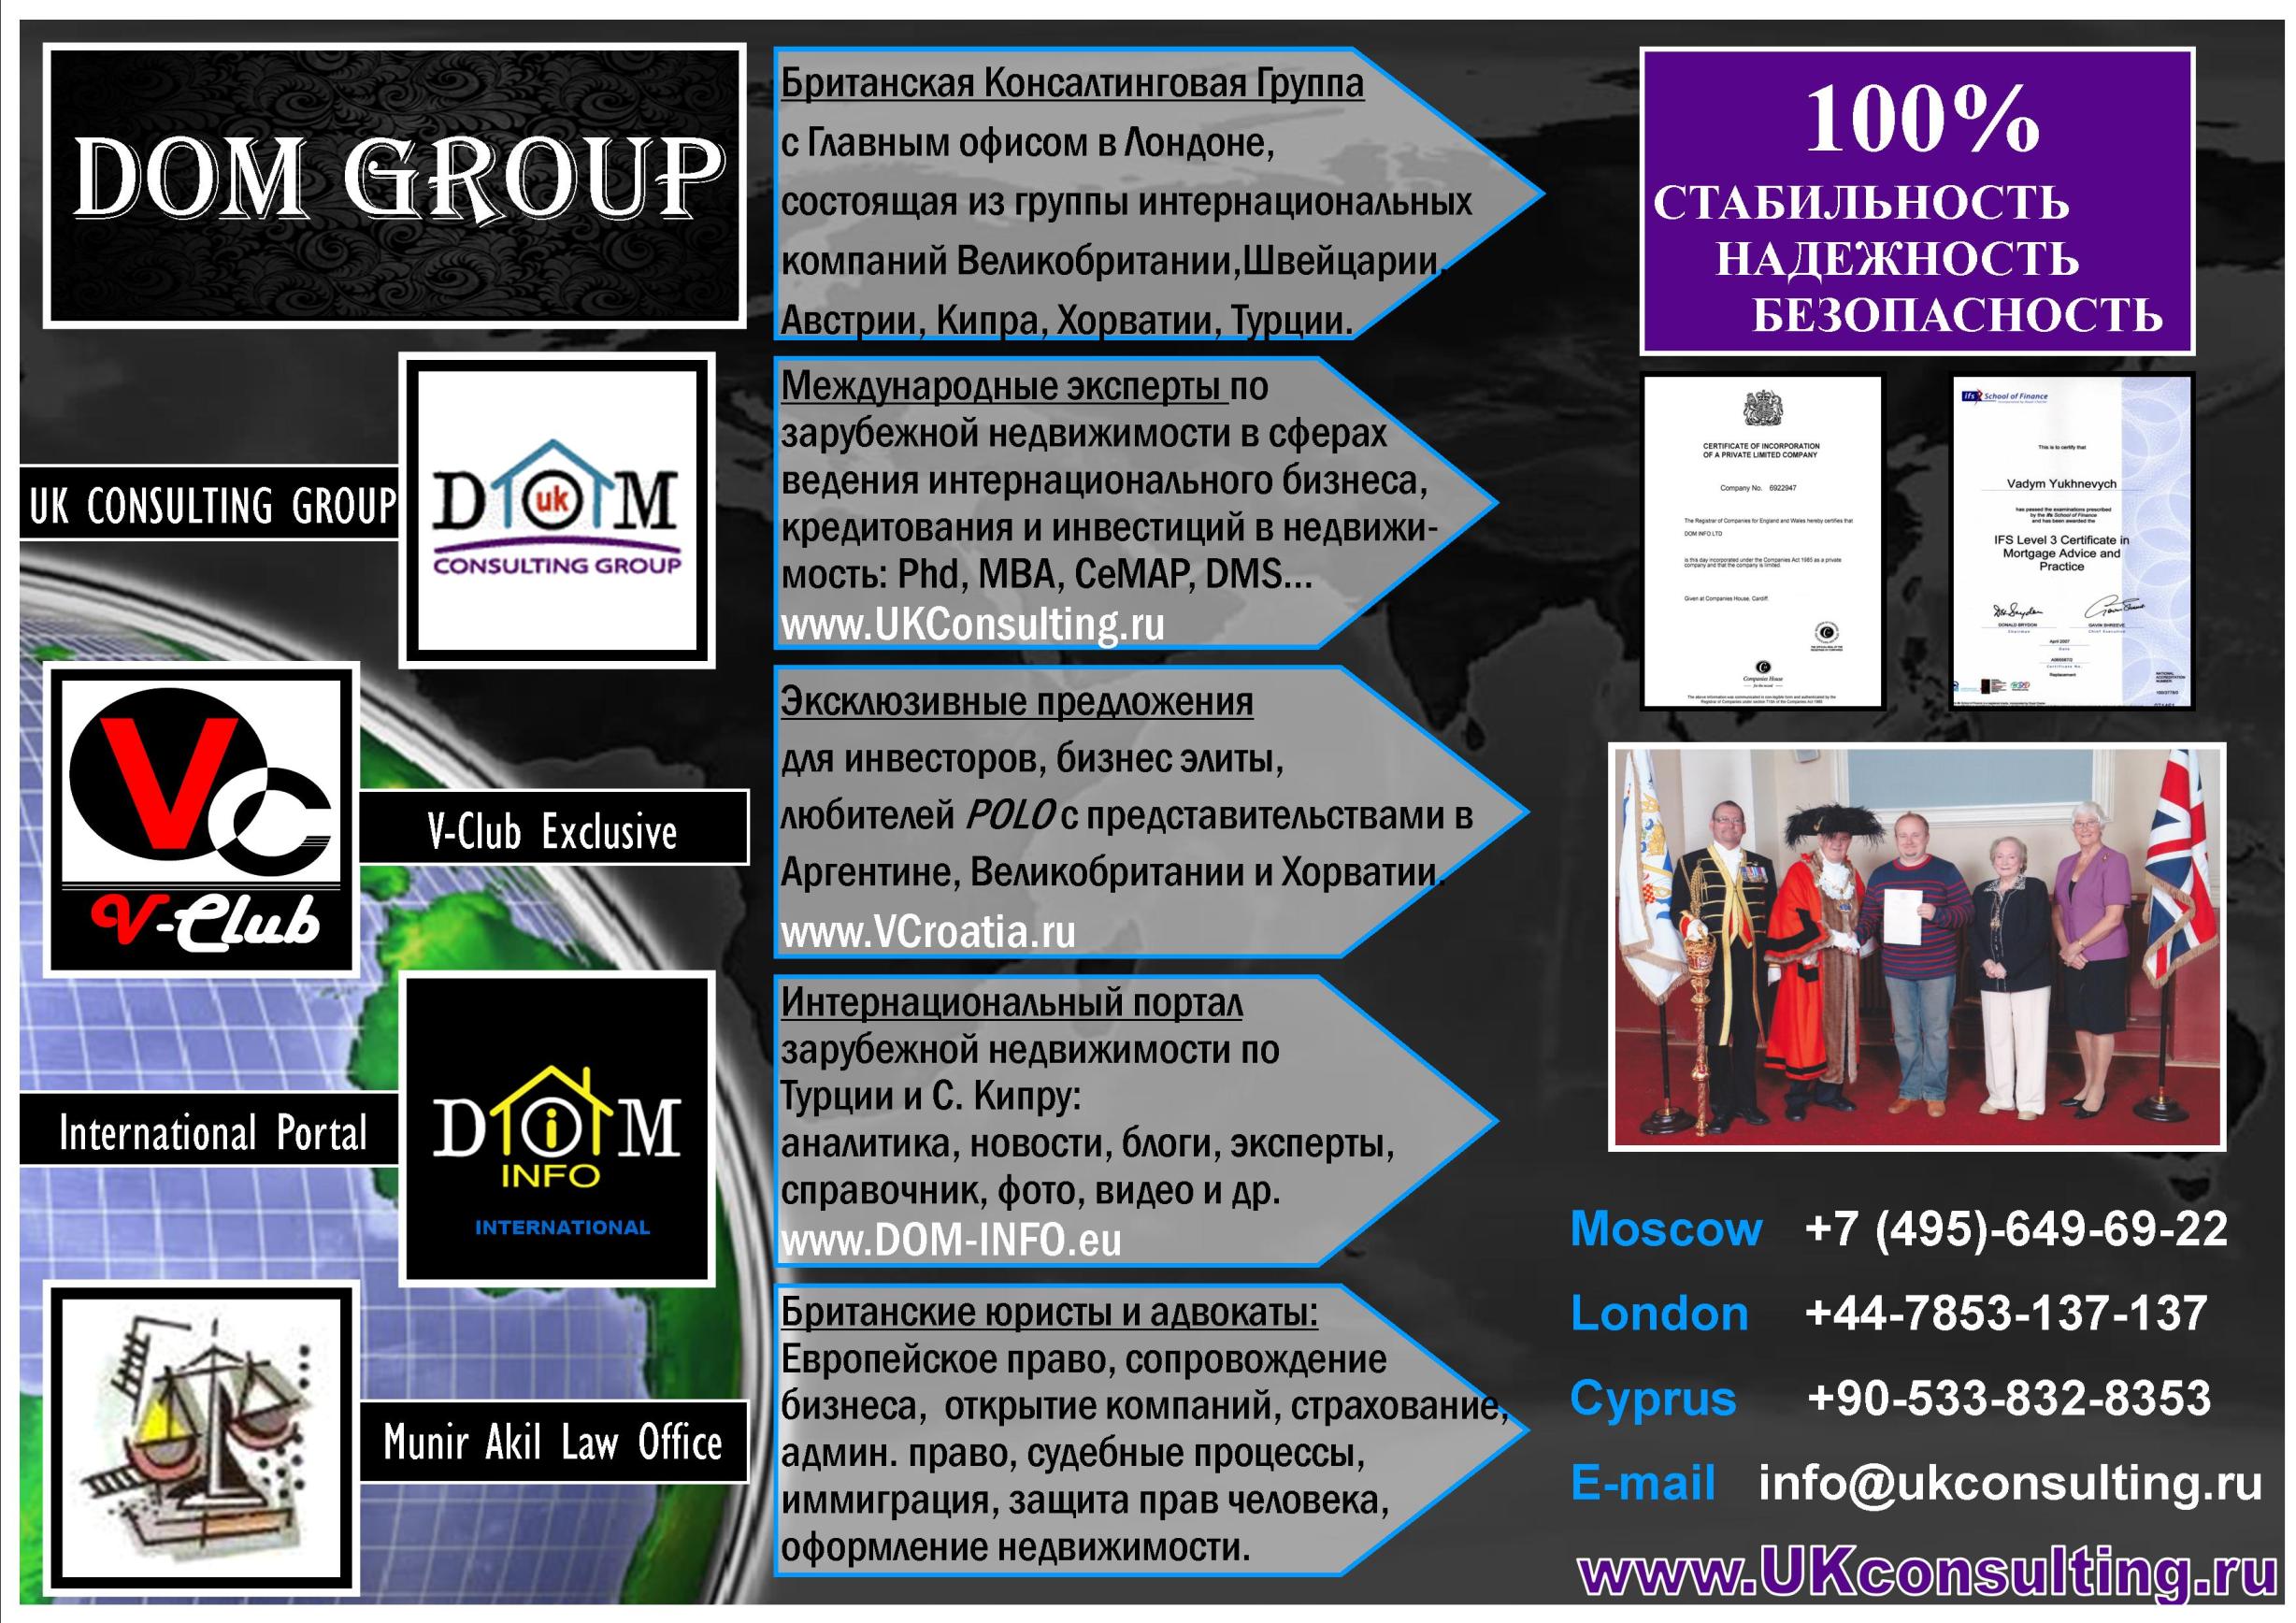 UK Consulting Group DOM-INFO